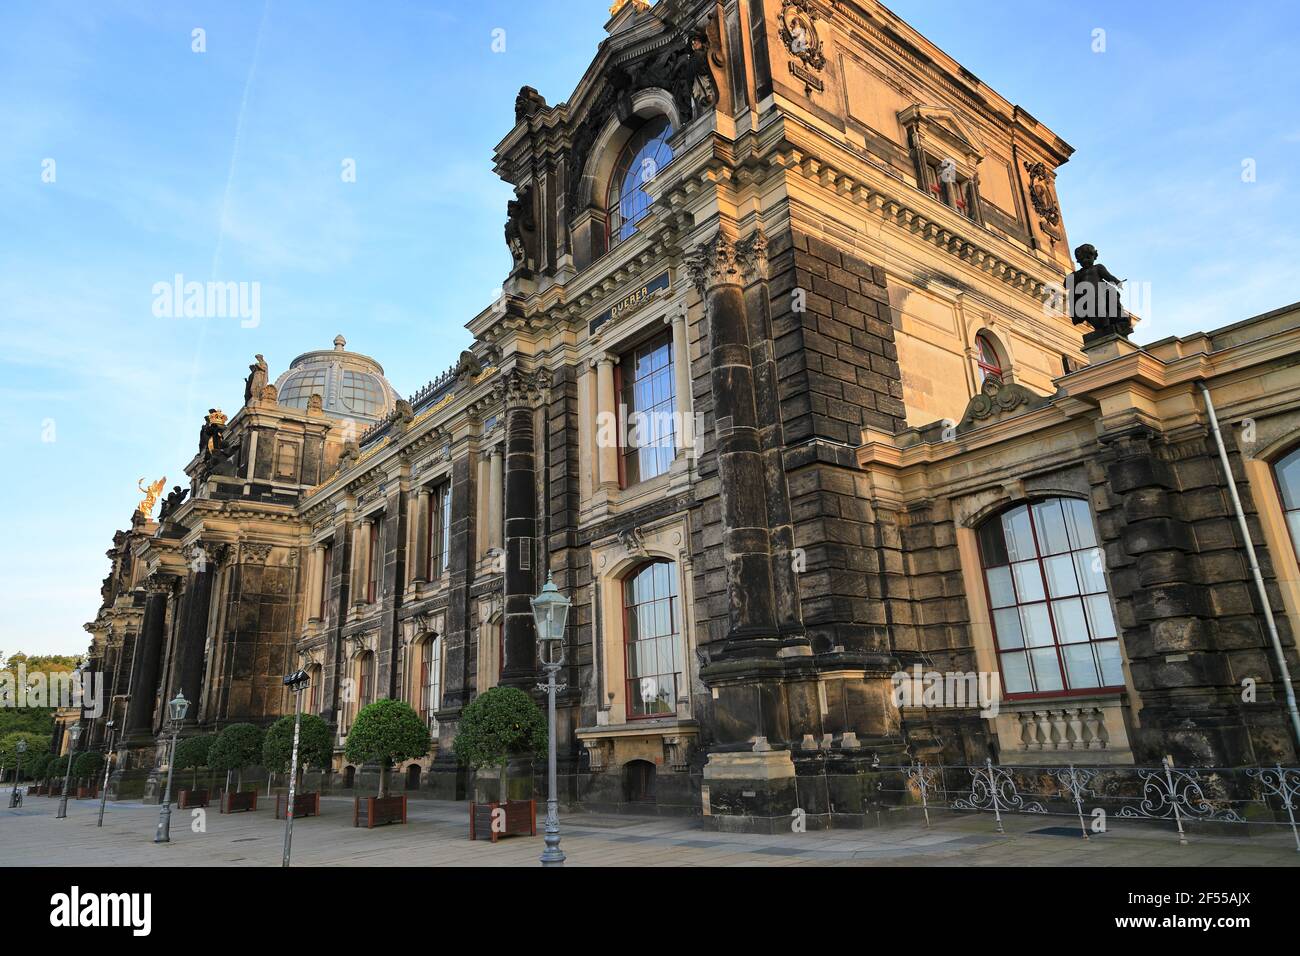 The Dresden Academy of Fine Arts on Brühl's Terrace, view of the front side. Dresden, Saxony, Germany, Europe. Stock Photo